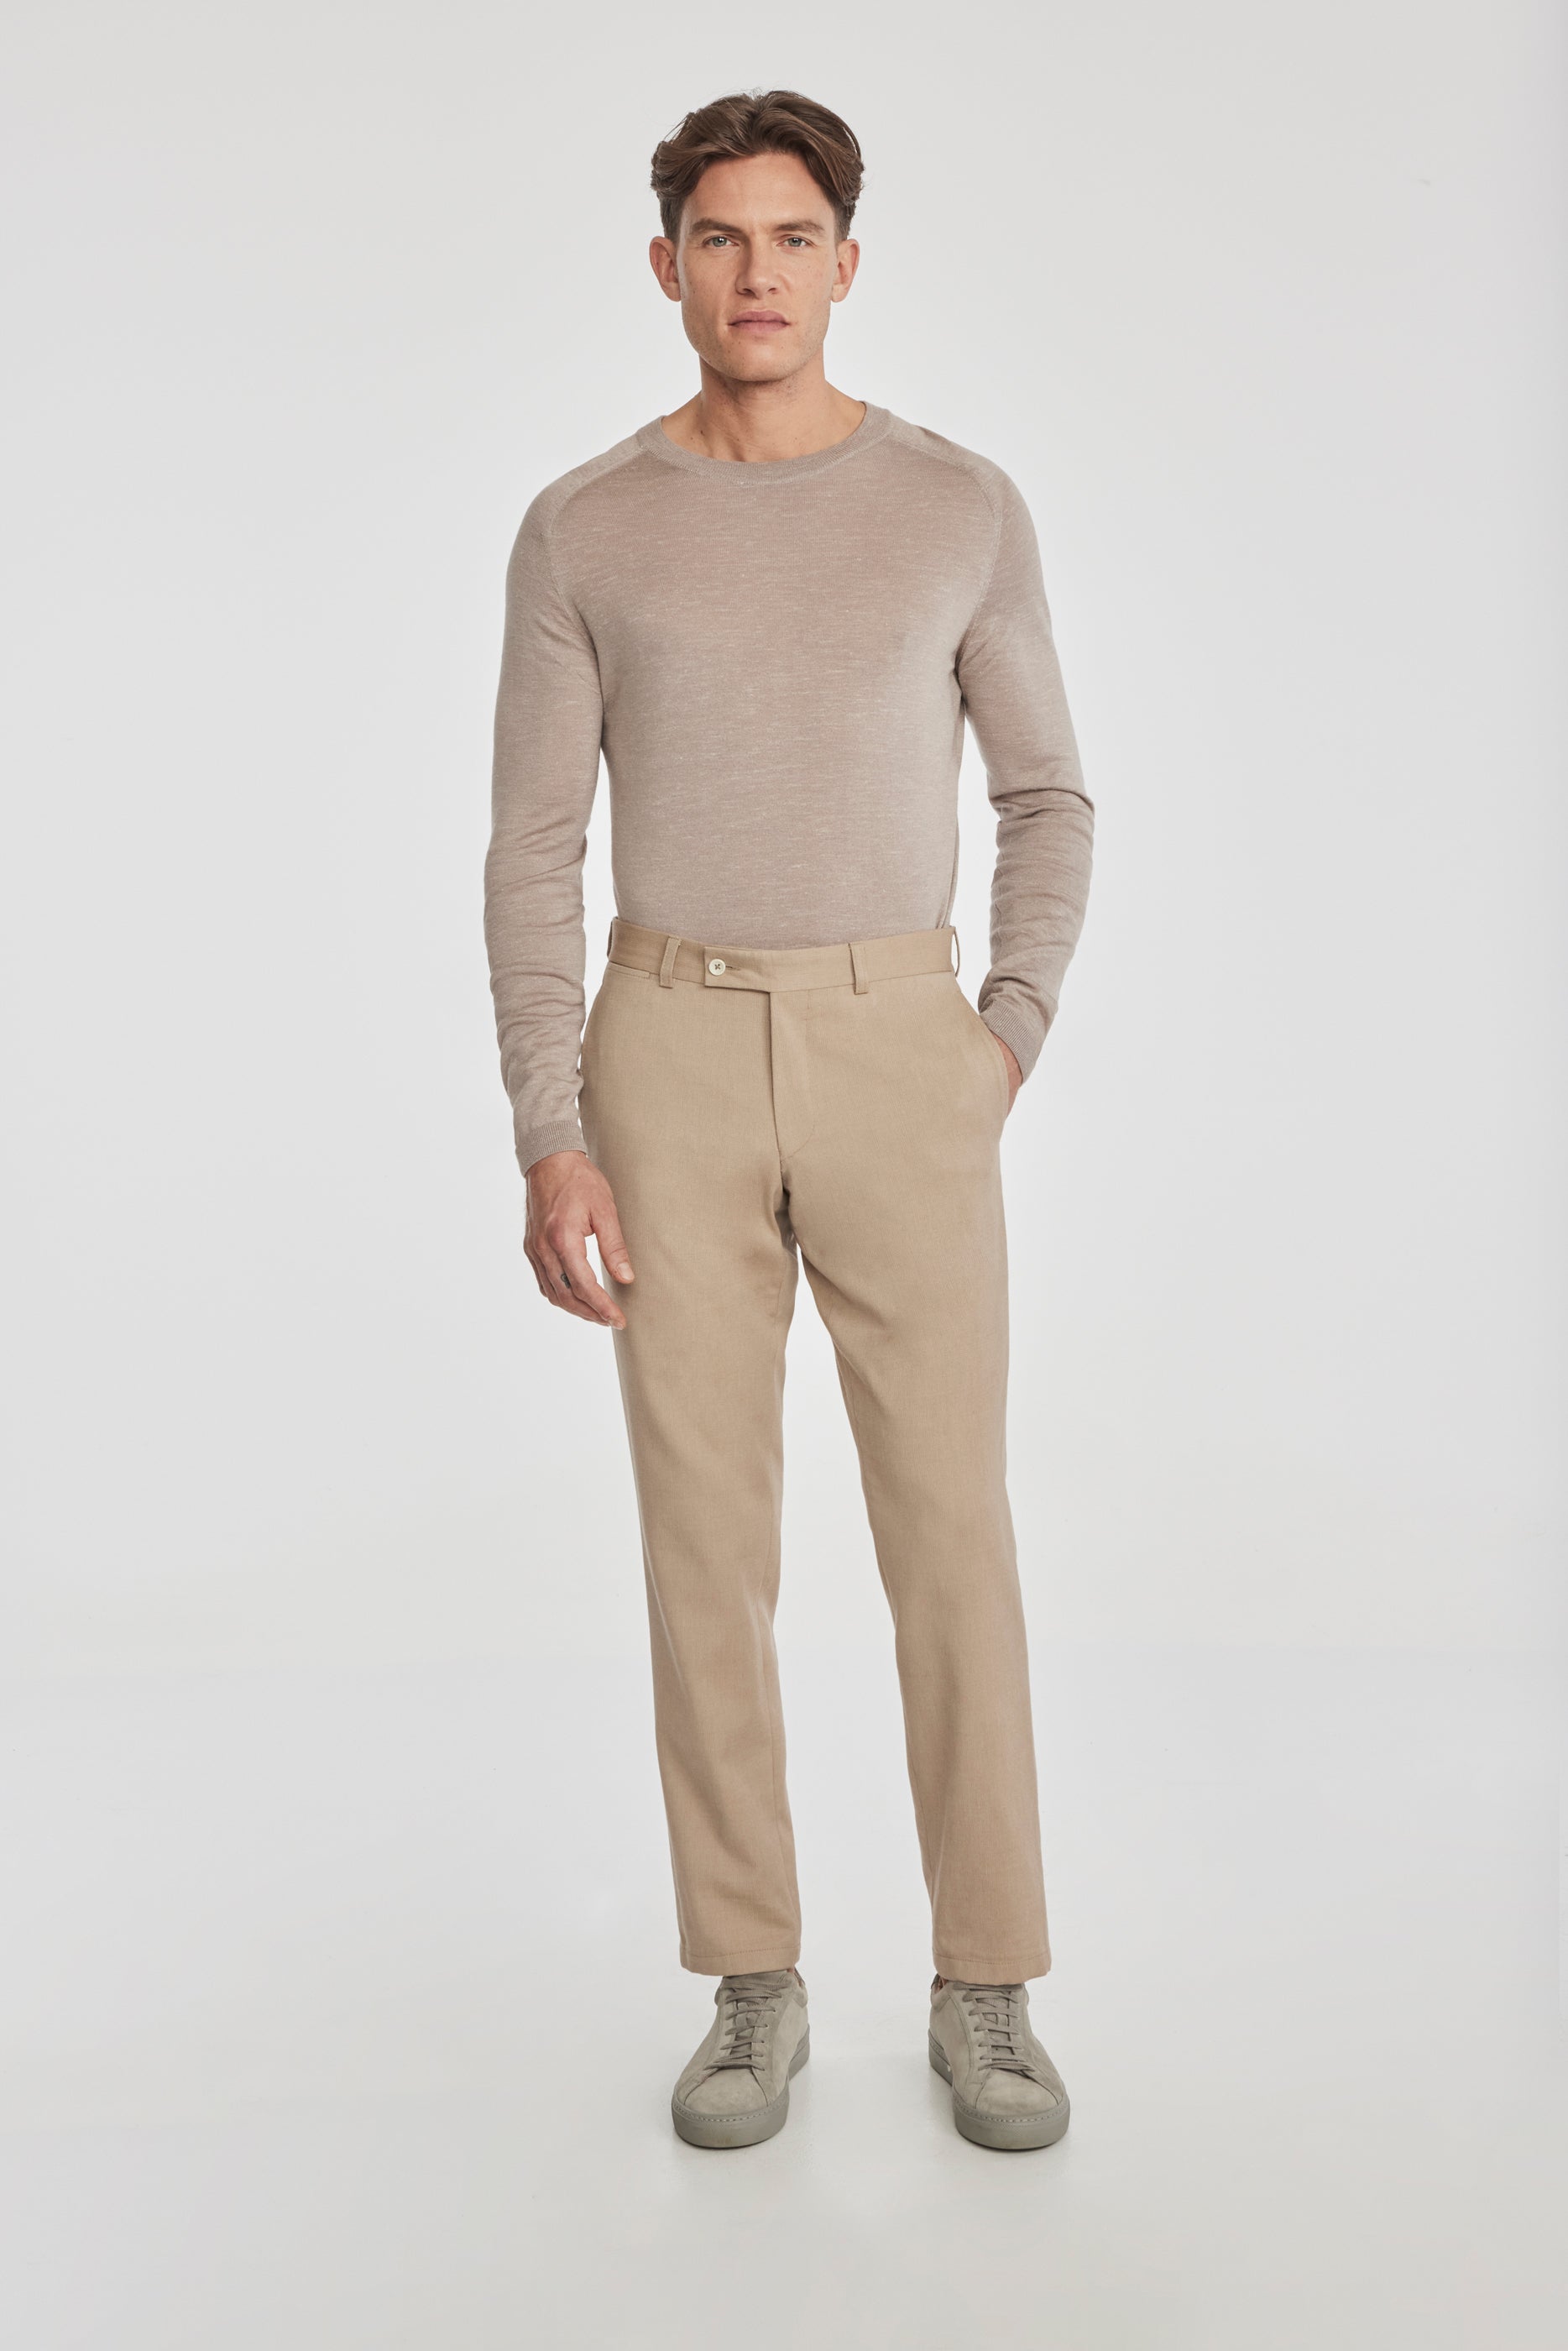 Alt view 2 Palmer Textured Cotton, Wool Stretch Trouser in Tan